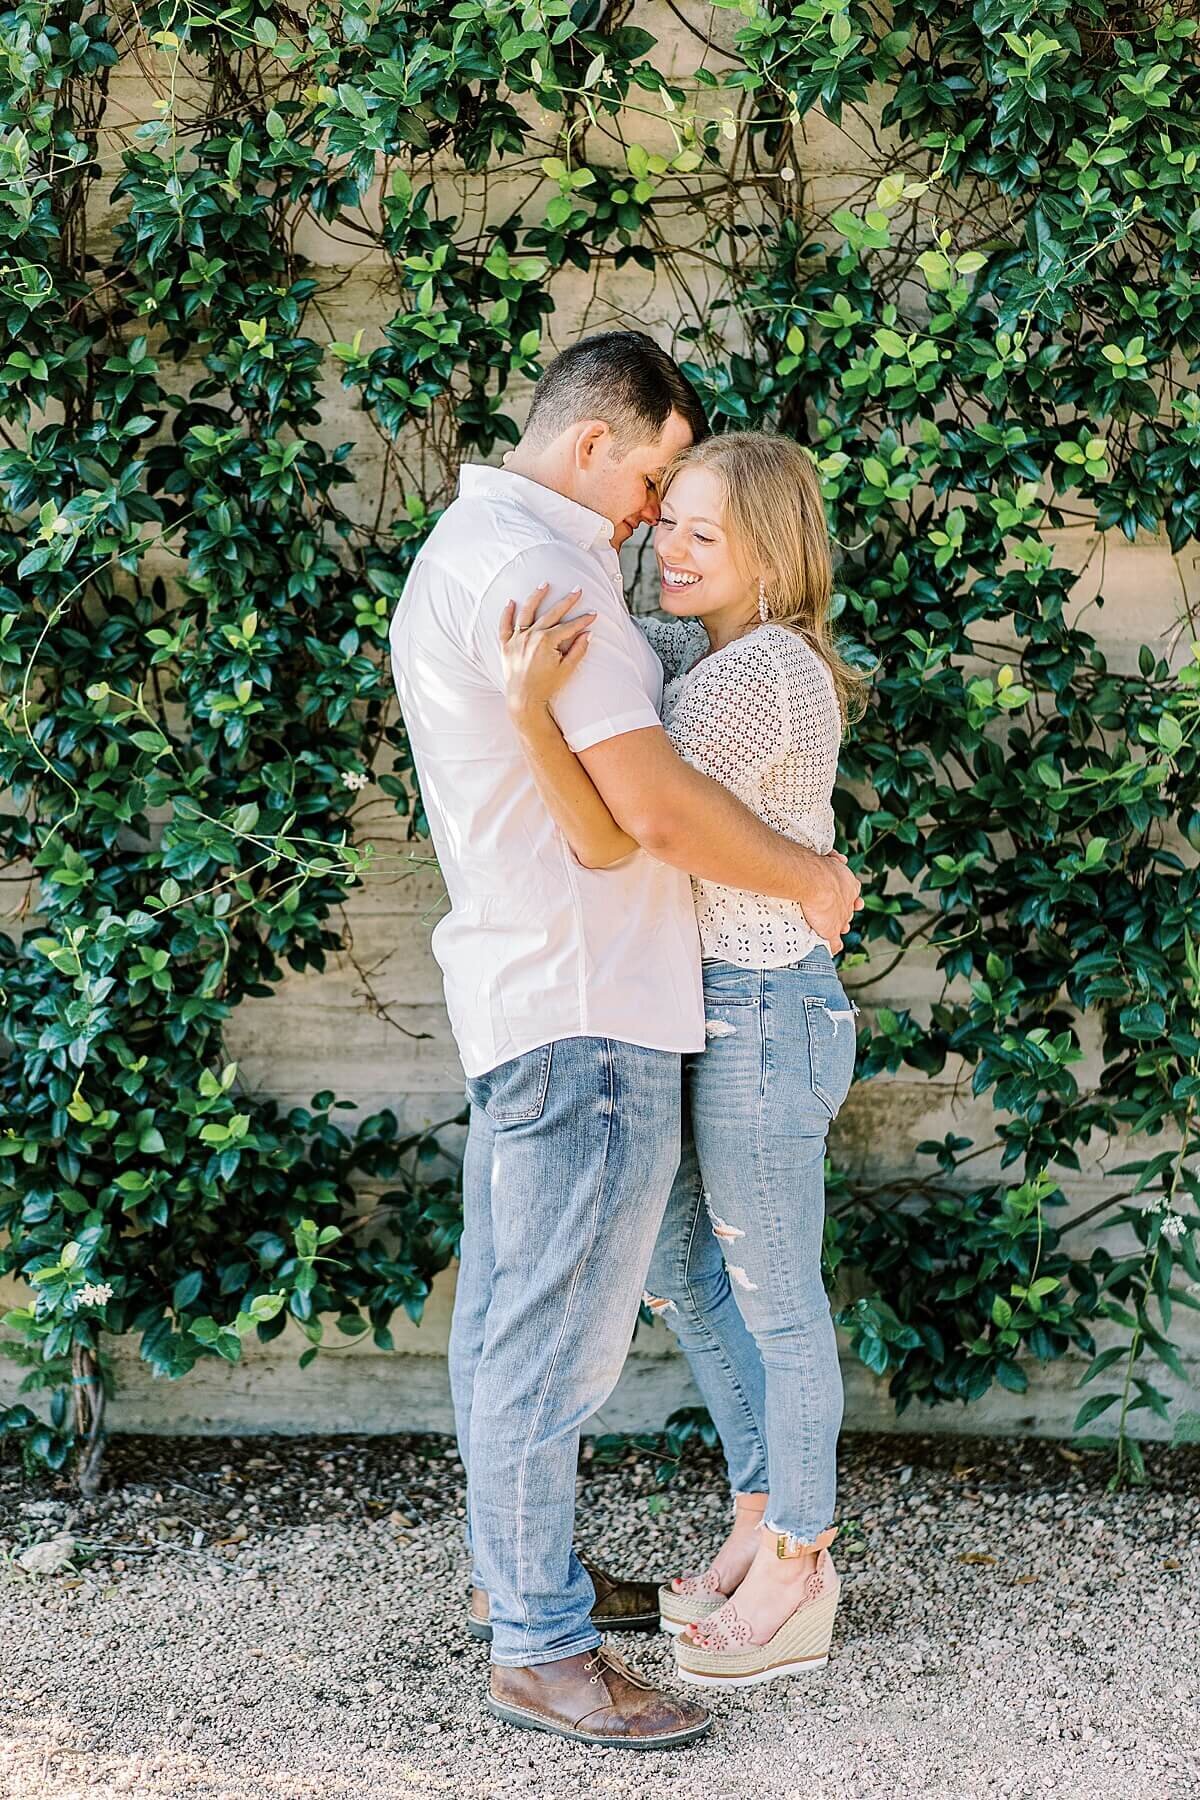 McGovern-Centennial-Gardens-Hermann-Park-Engagement-Session-Alicia-Yarrish-Photography_0032